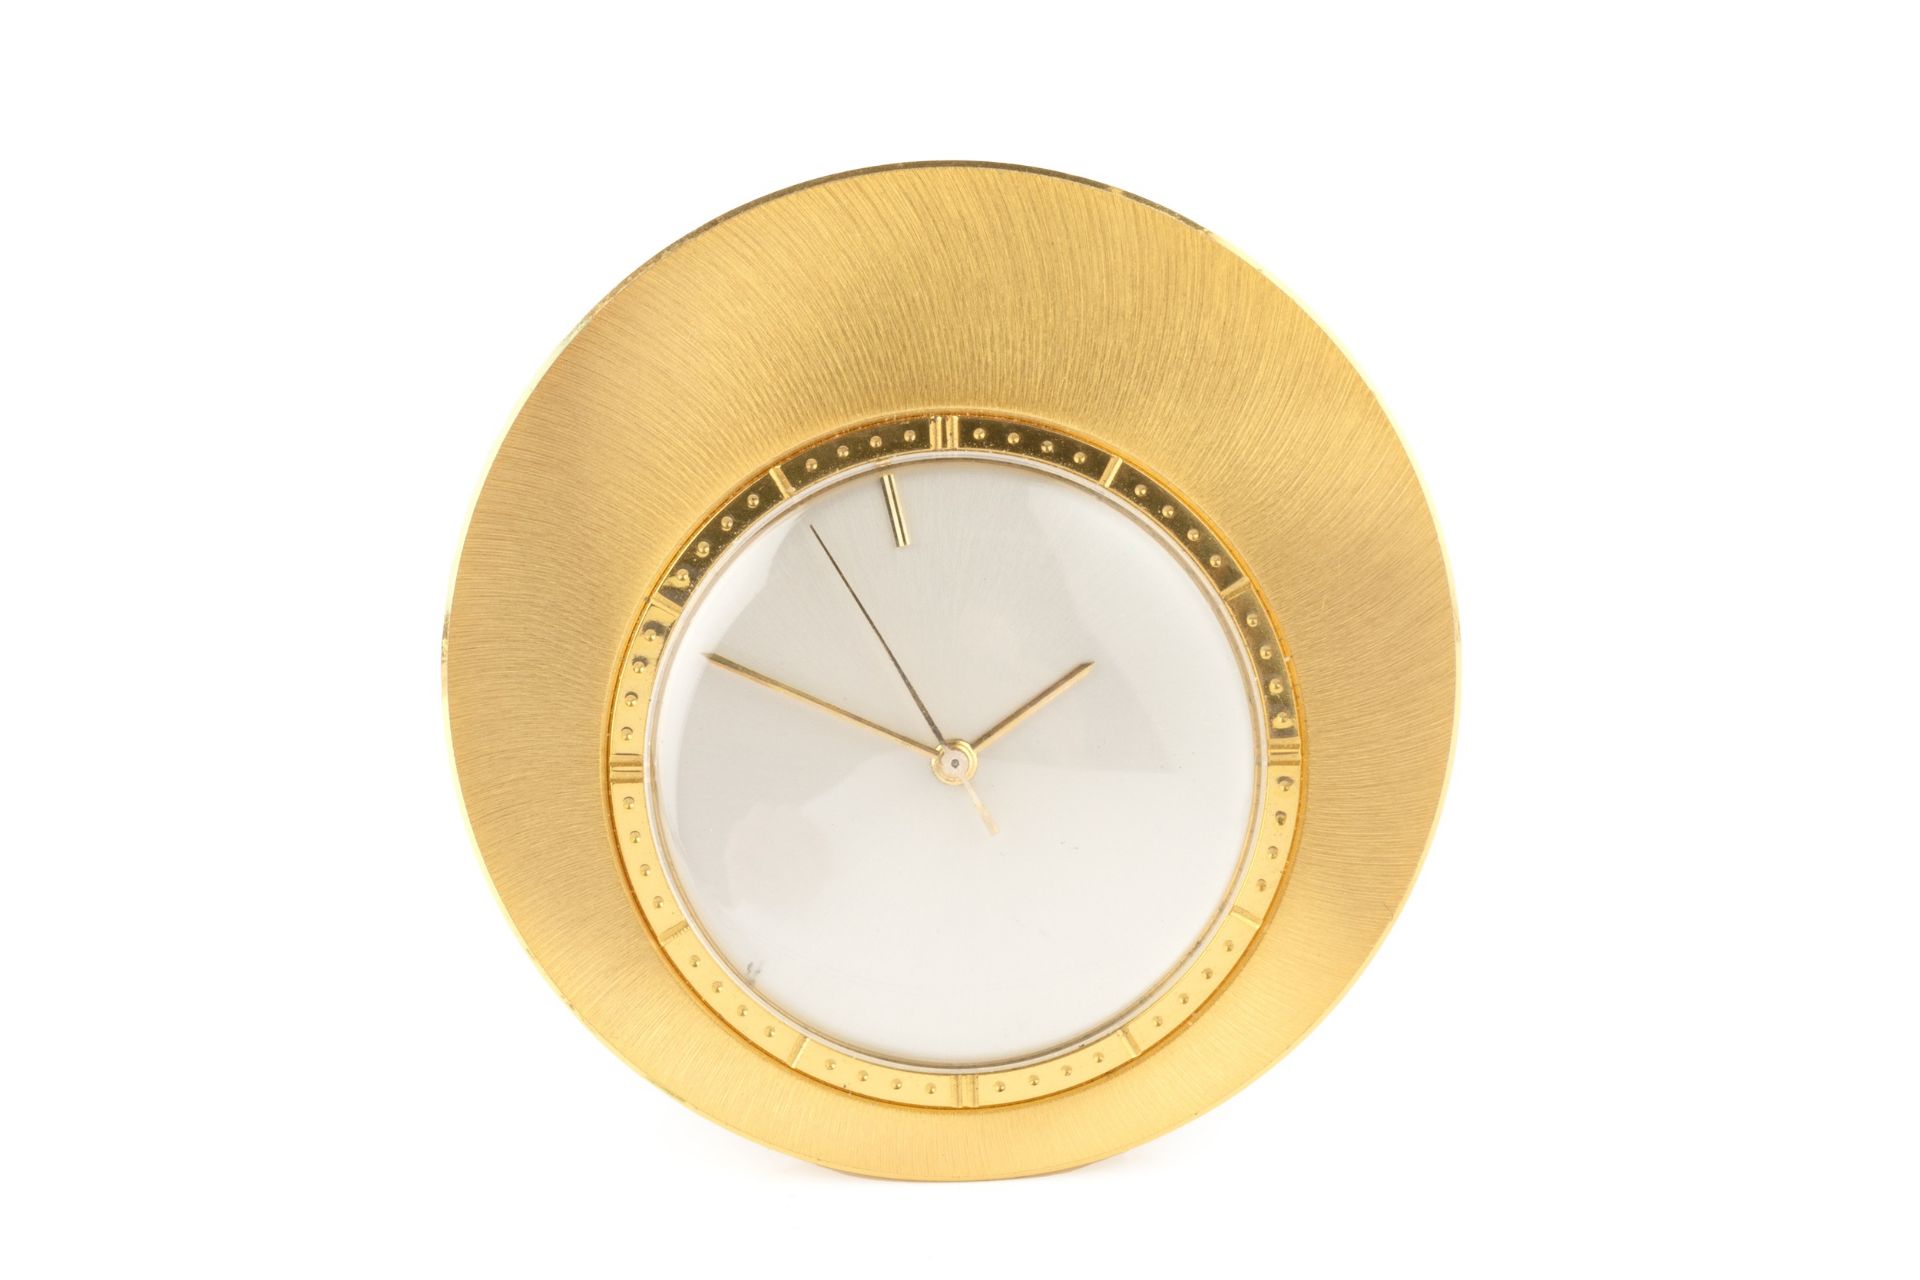 A Jaeger-LeCoultre gold plated circular travel timepiece, with circular silvered dial, and